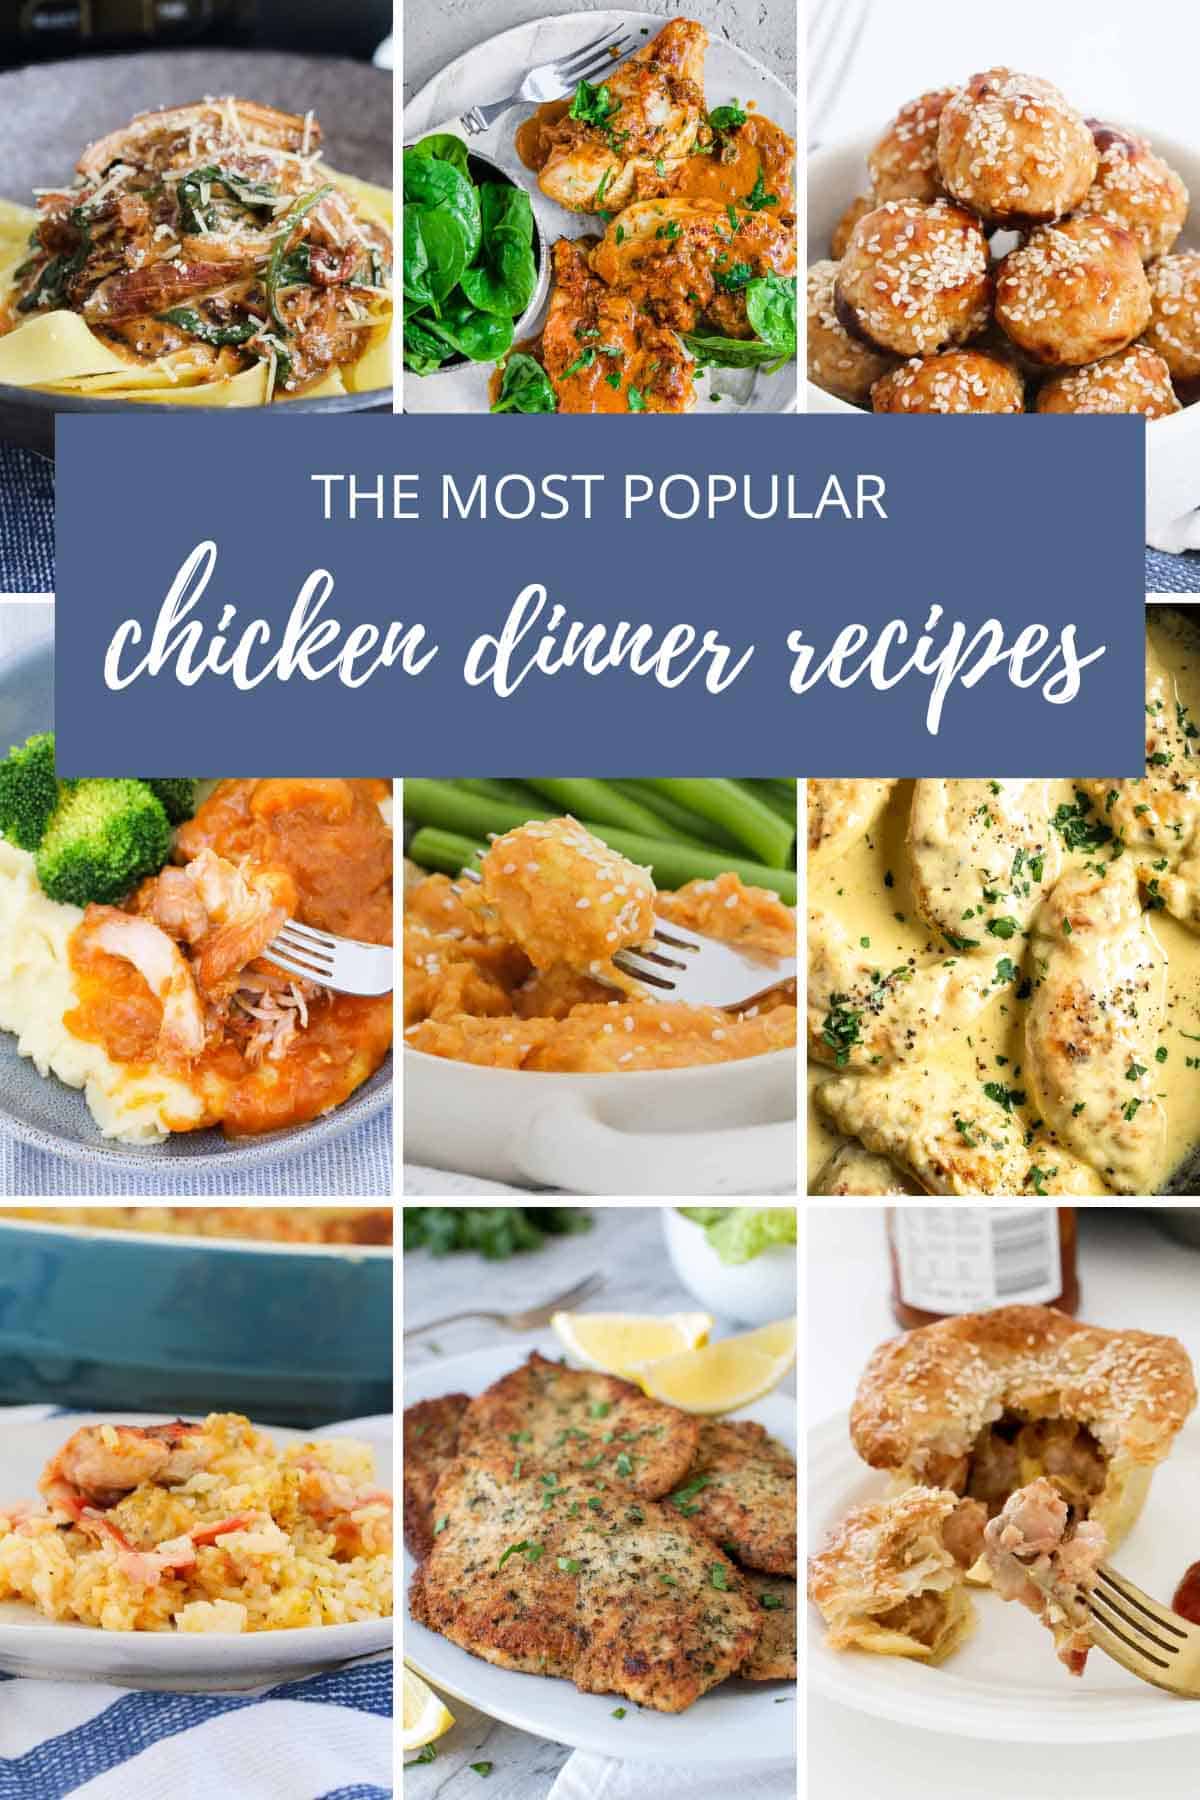 A collage of dinner recipes made with chicken.